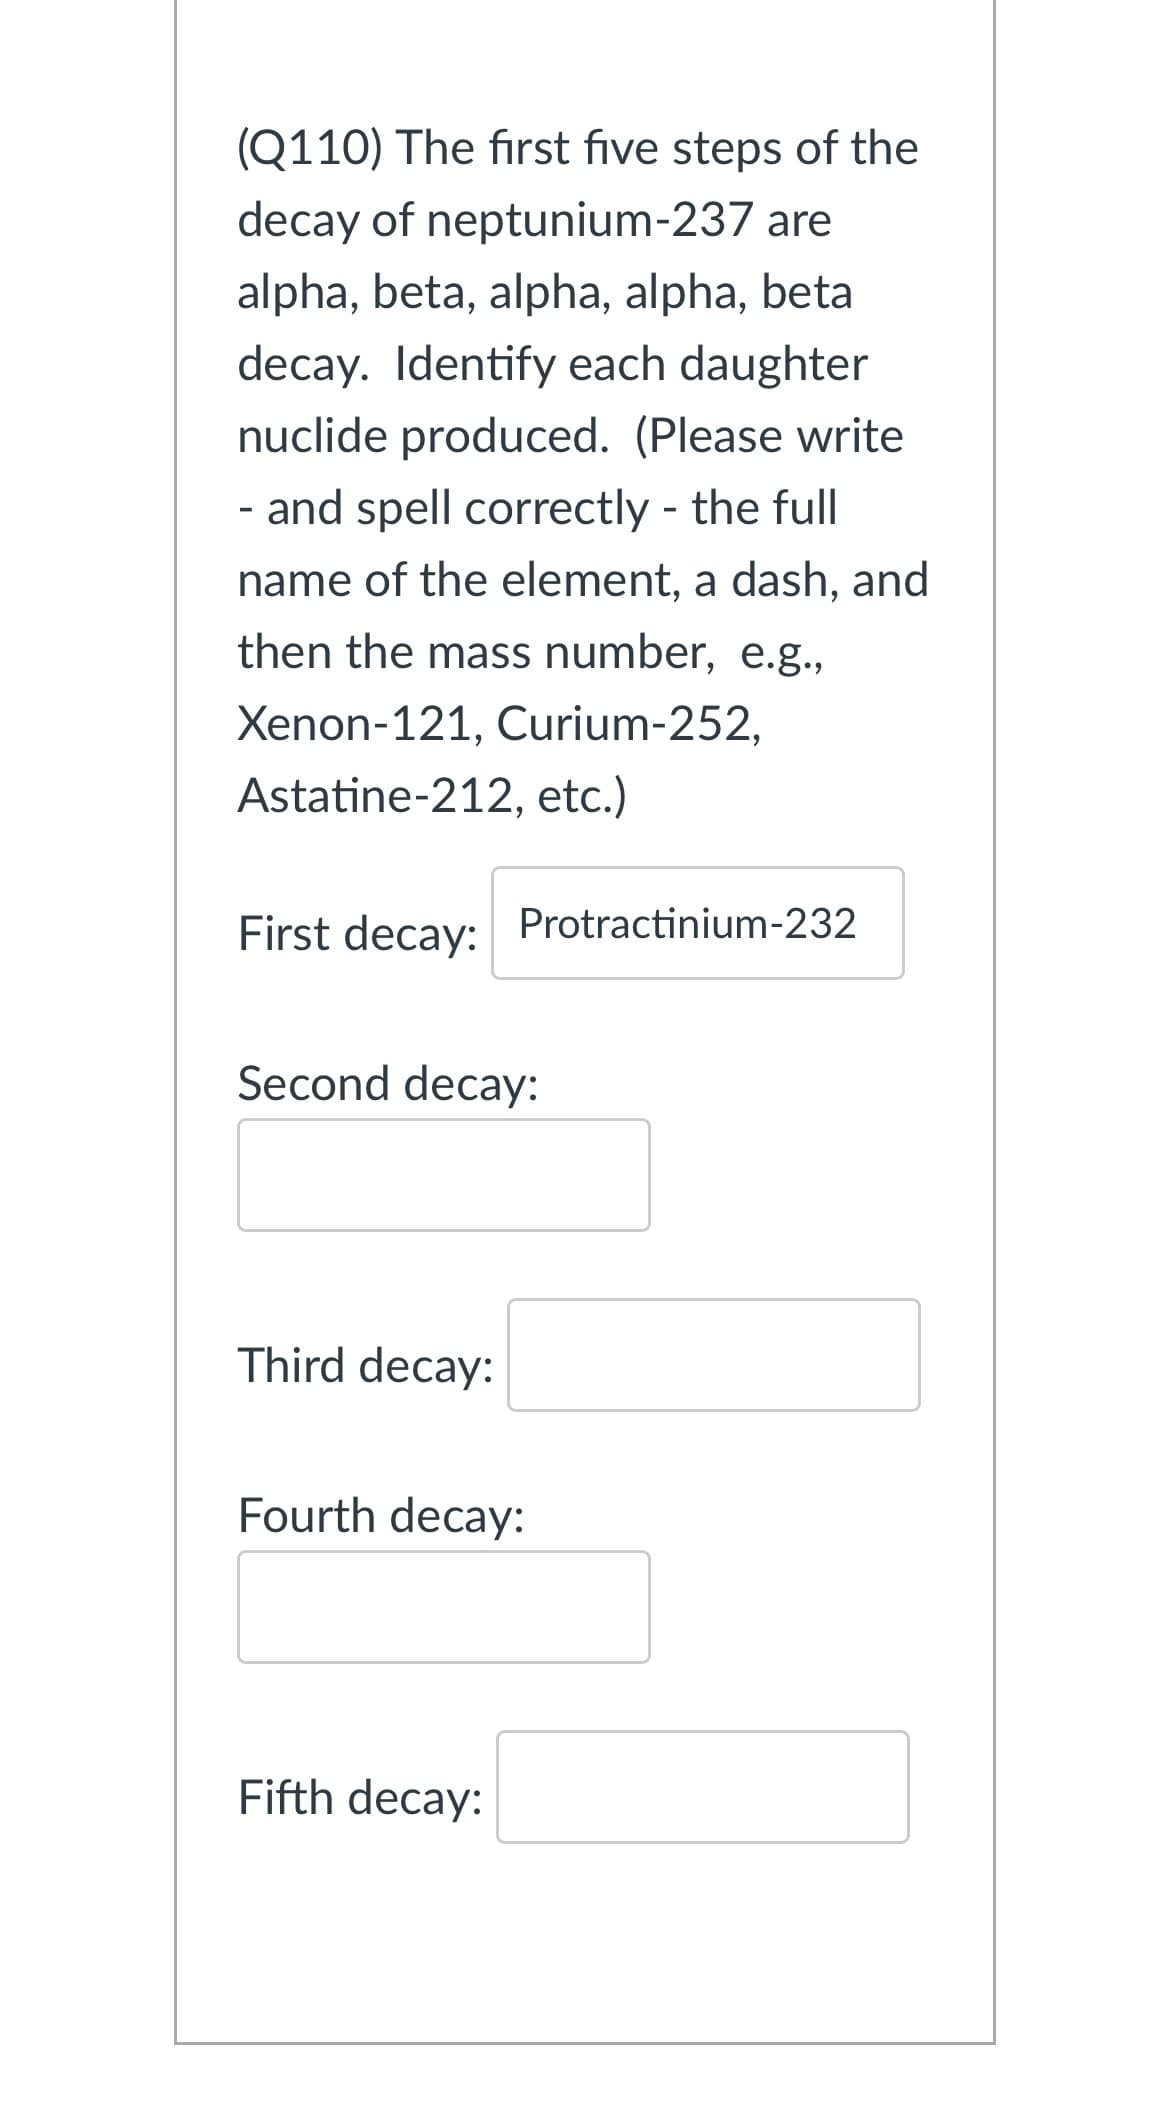 (Q110) The first five steps of the
decay of neptunium-237 are
alpha, beta, alpha, alpha, beta
decay. Identify each daughter
nuclide produced. (Please write
- and spell correctly - the full
name of the element, a dash, and
then the mass number, e.g.,
Xenon-121, Curium-252,
Astatine-212, etc.)
First decay: Protractinium-232
Second decay:
Third decay:
Fourth decay:
Fifth decay: